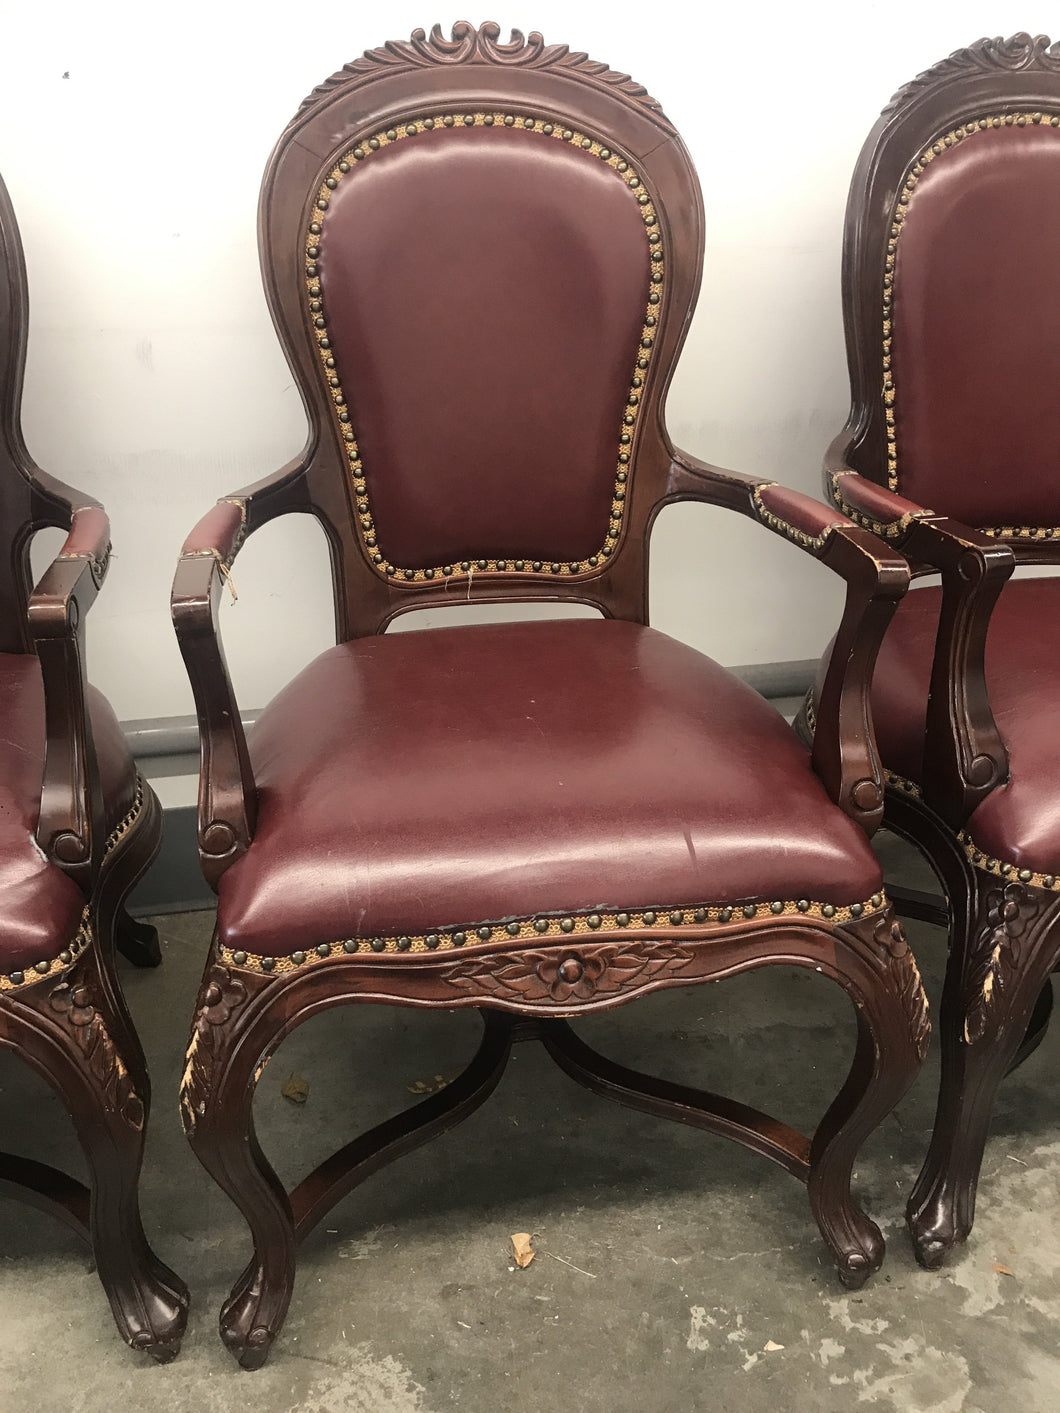 Dining Chairs - Kenner Habitat for Humanity ReStore